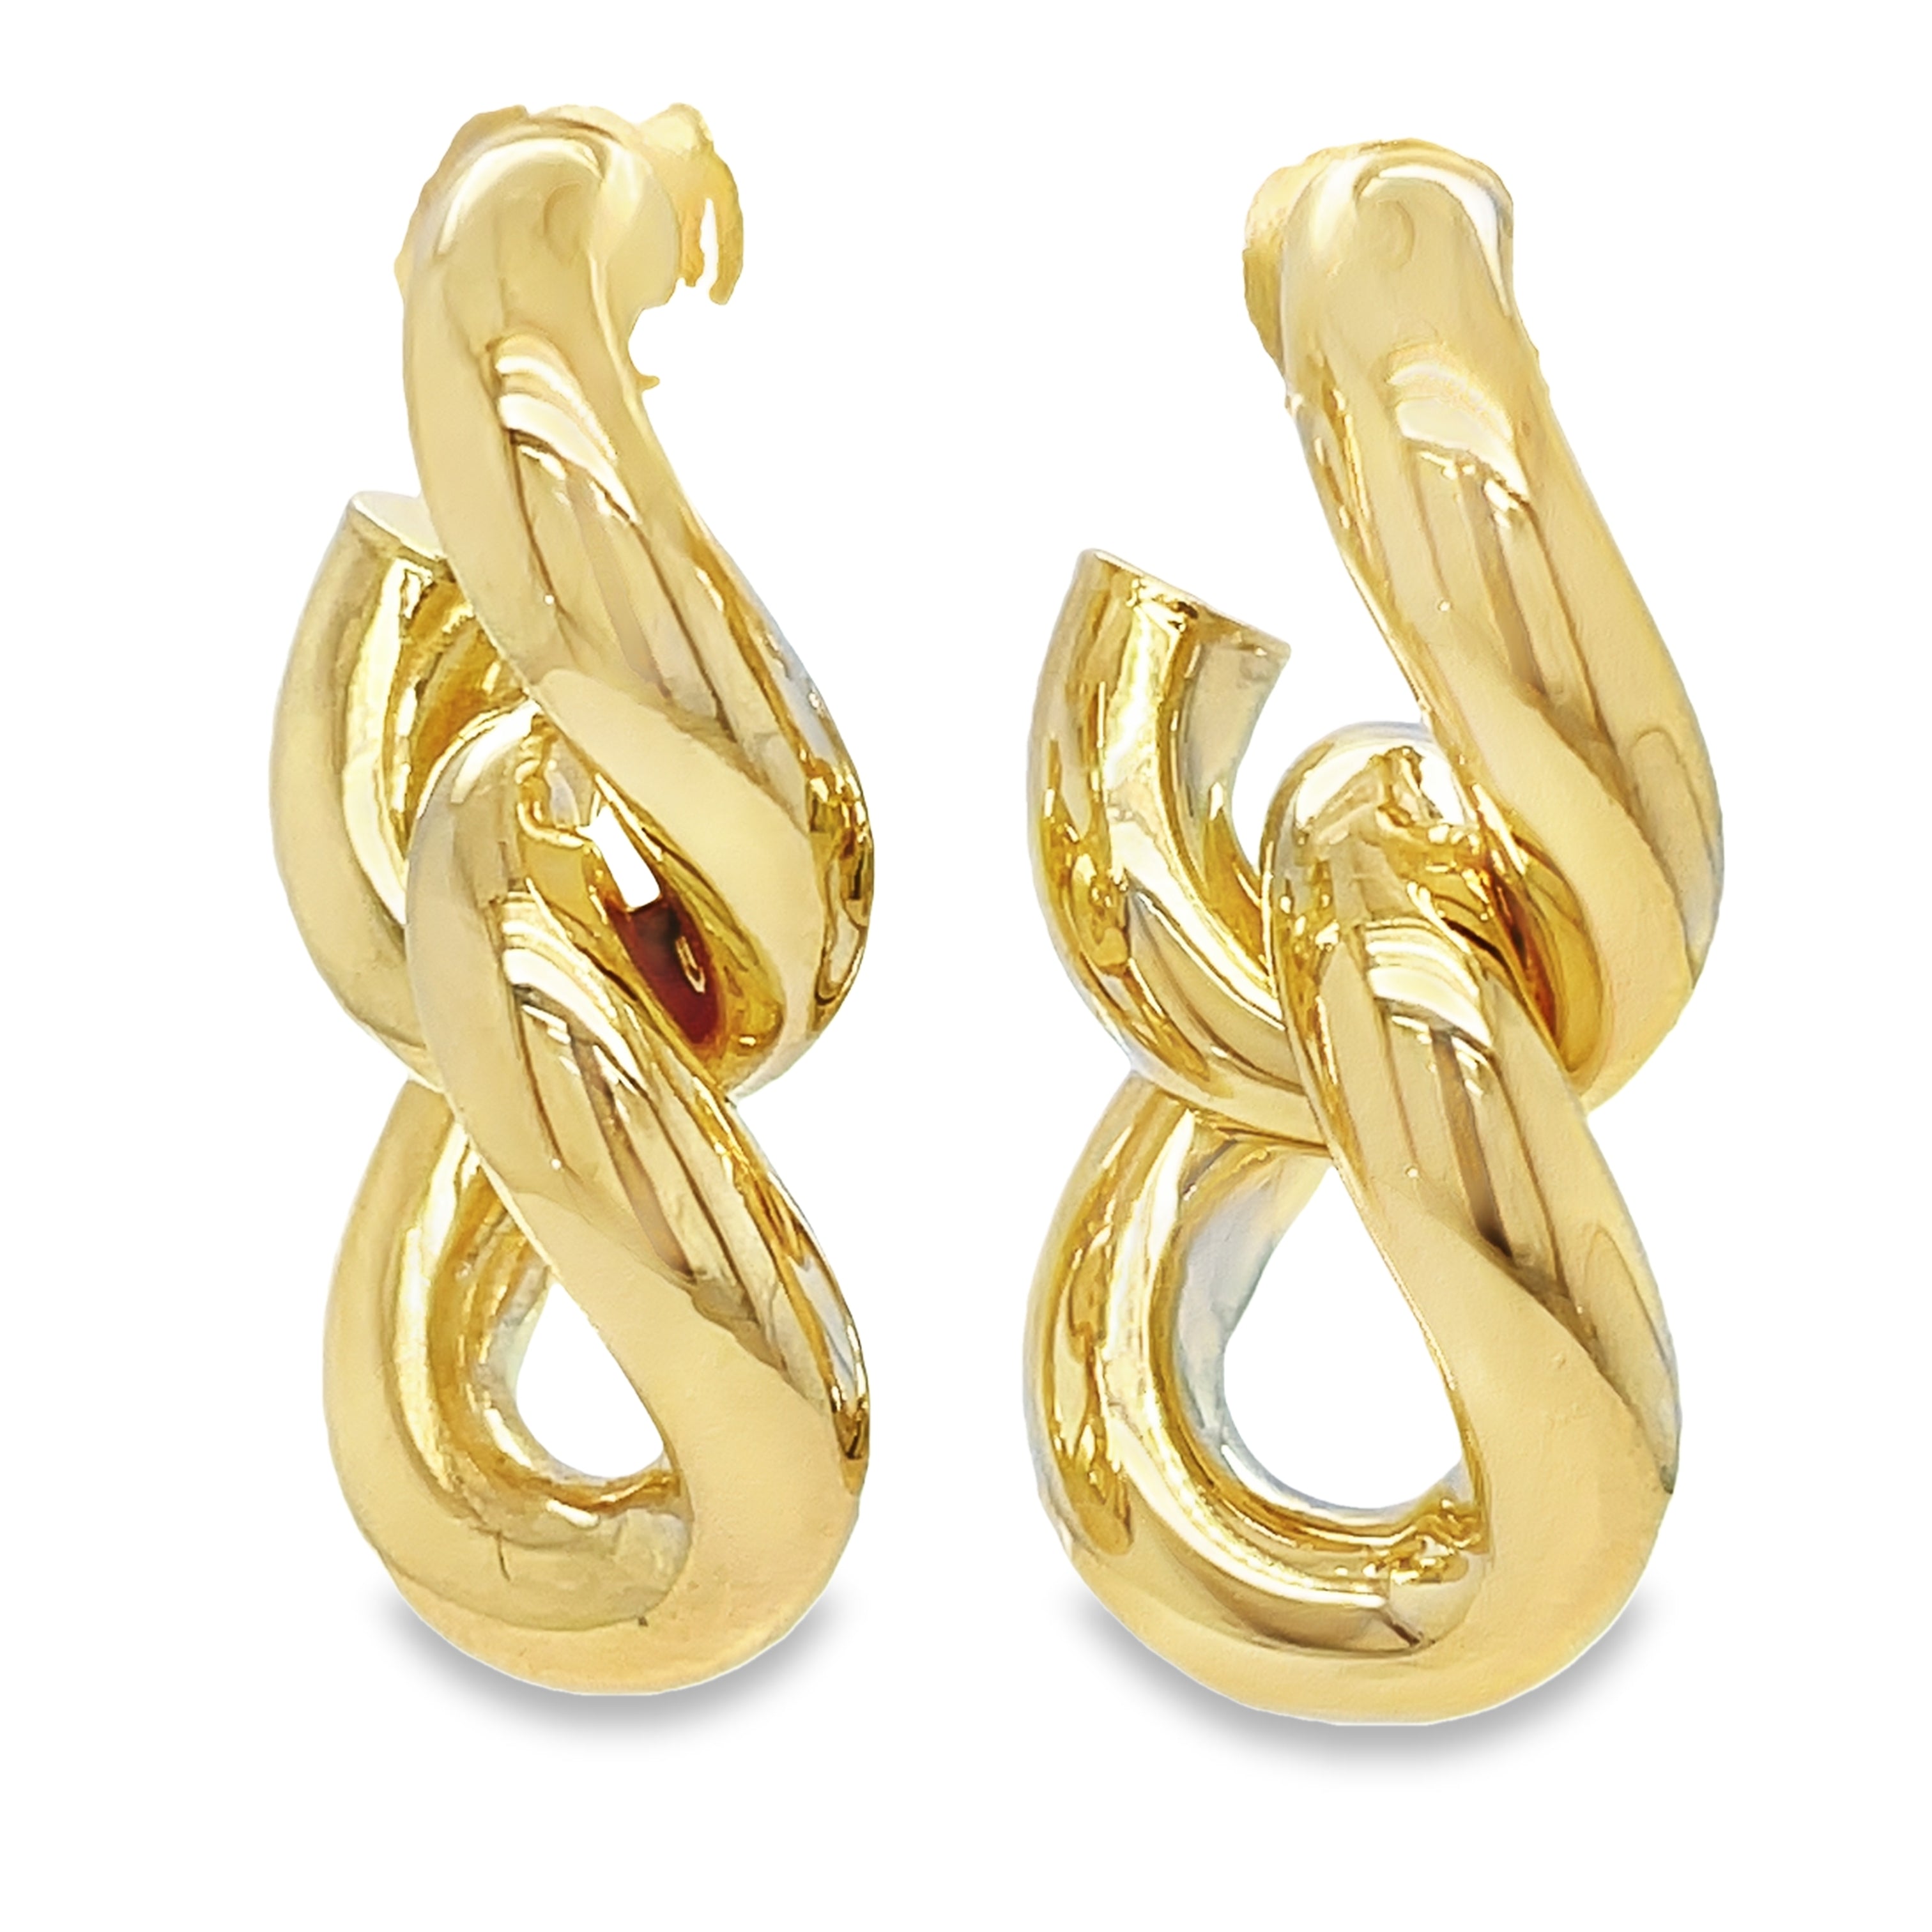 Add a touch of elegance to your outfit with our 14K Italian Yellow Gold Chain Link Drop Earrings! Made in Italy with secure friction system, these earrings are 5.00 mm thick and 1 1/2" long for a perfect balance of style and comfort. Elevate your look with these stunning earrings now!